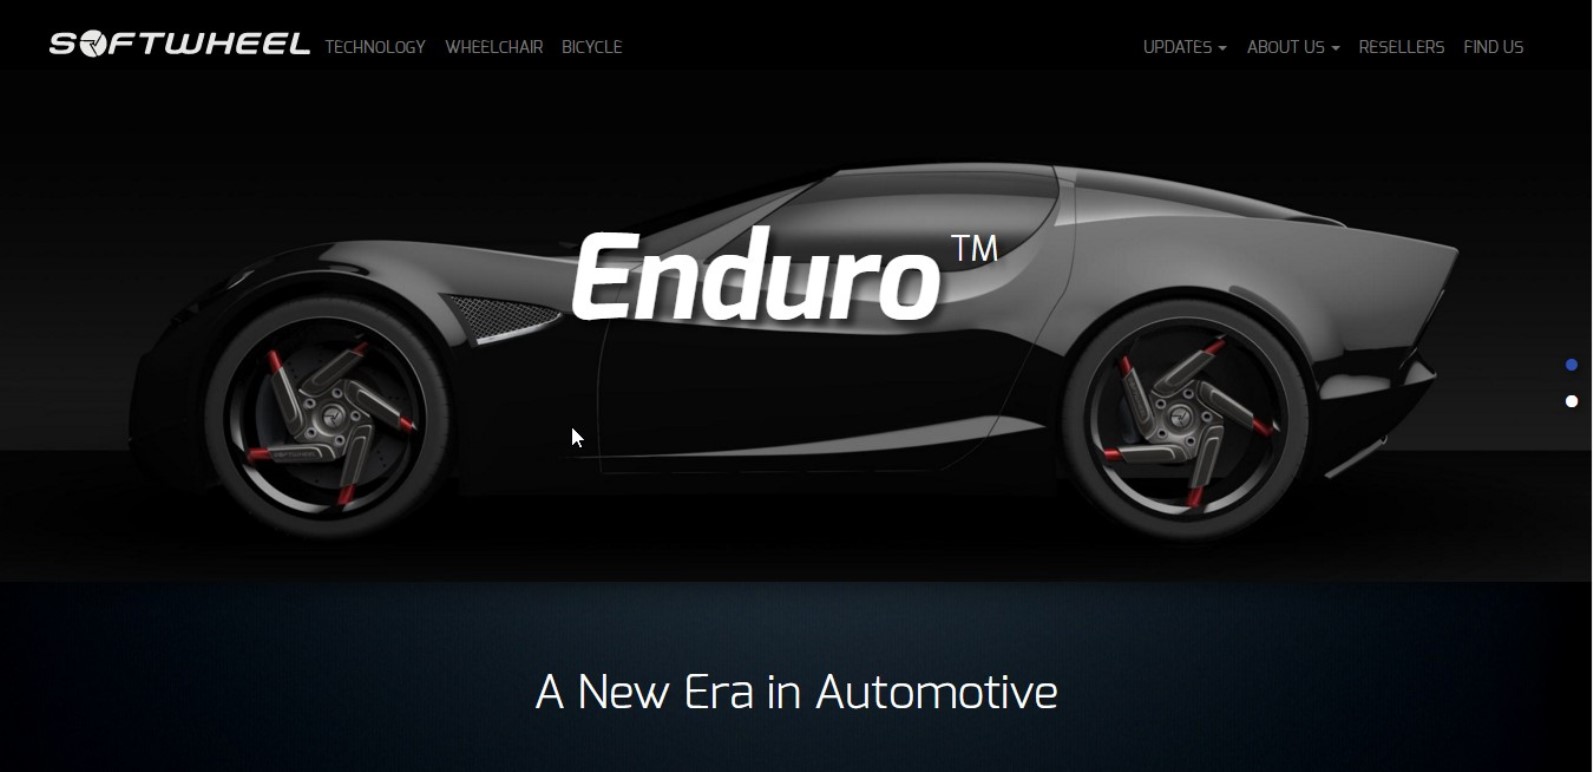 SoftWheel’s Enduro could change the tire industry dramatically. Photo: screenshot